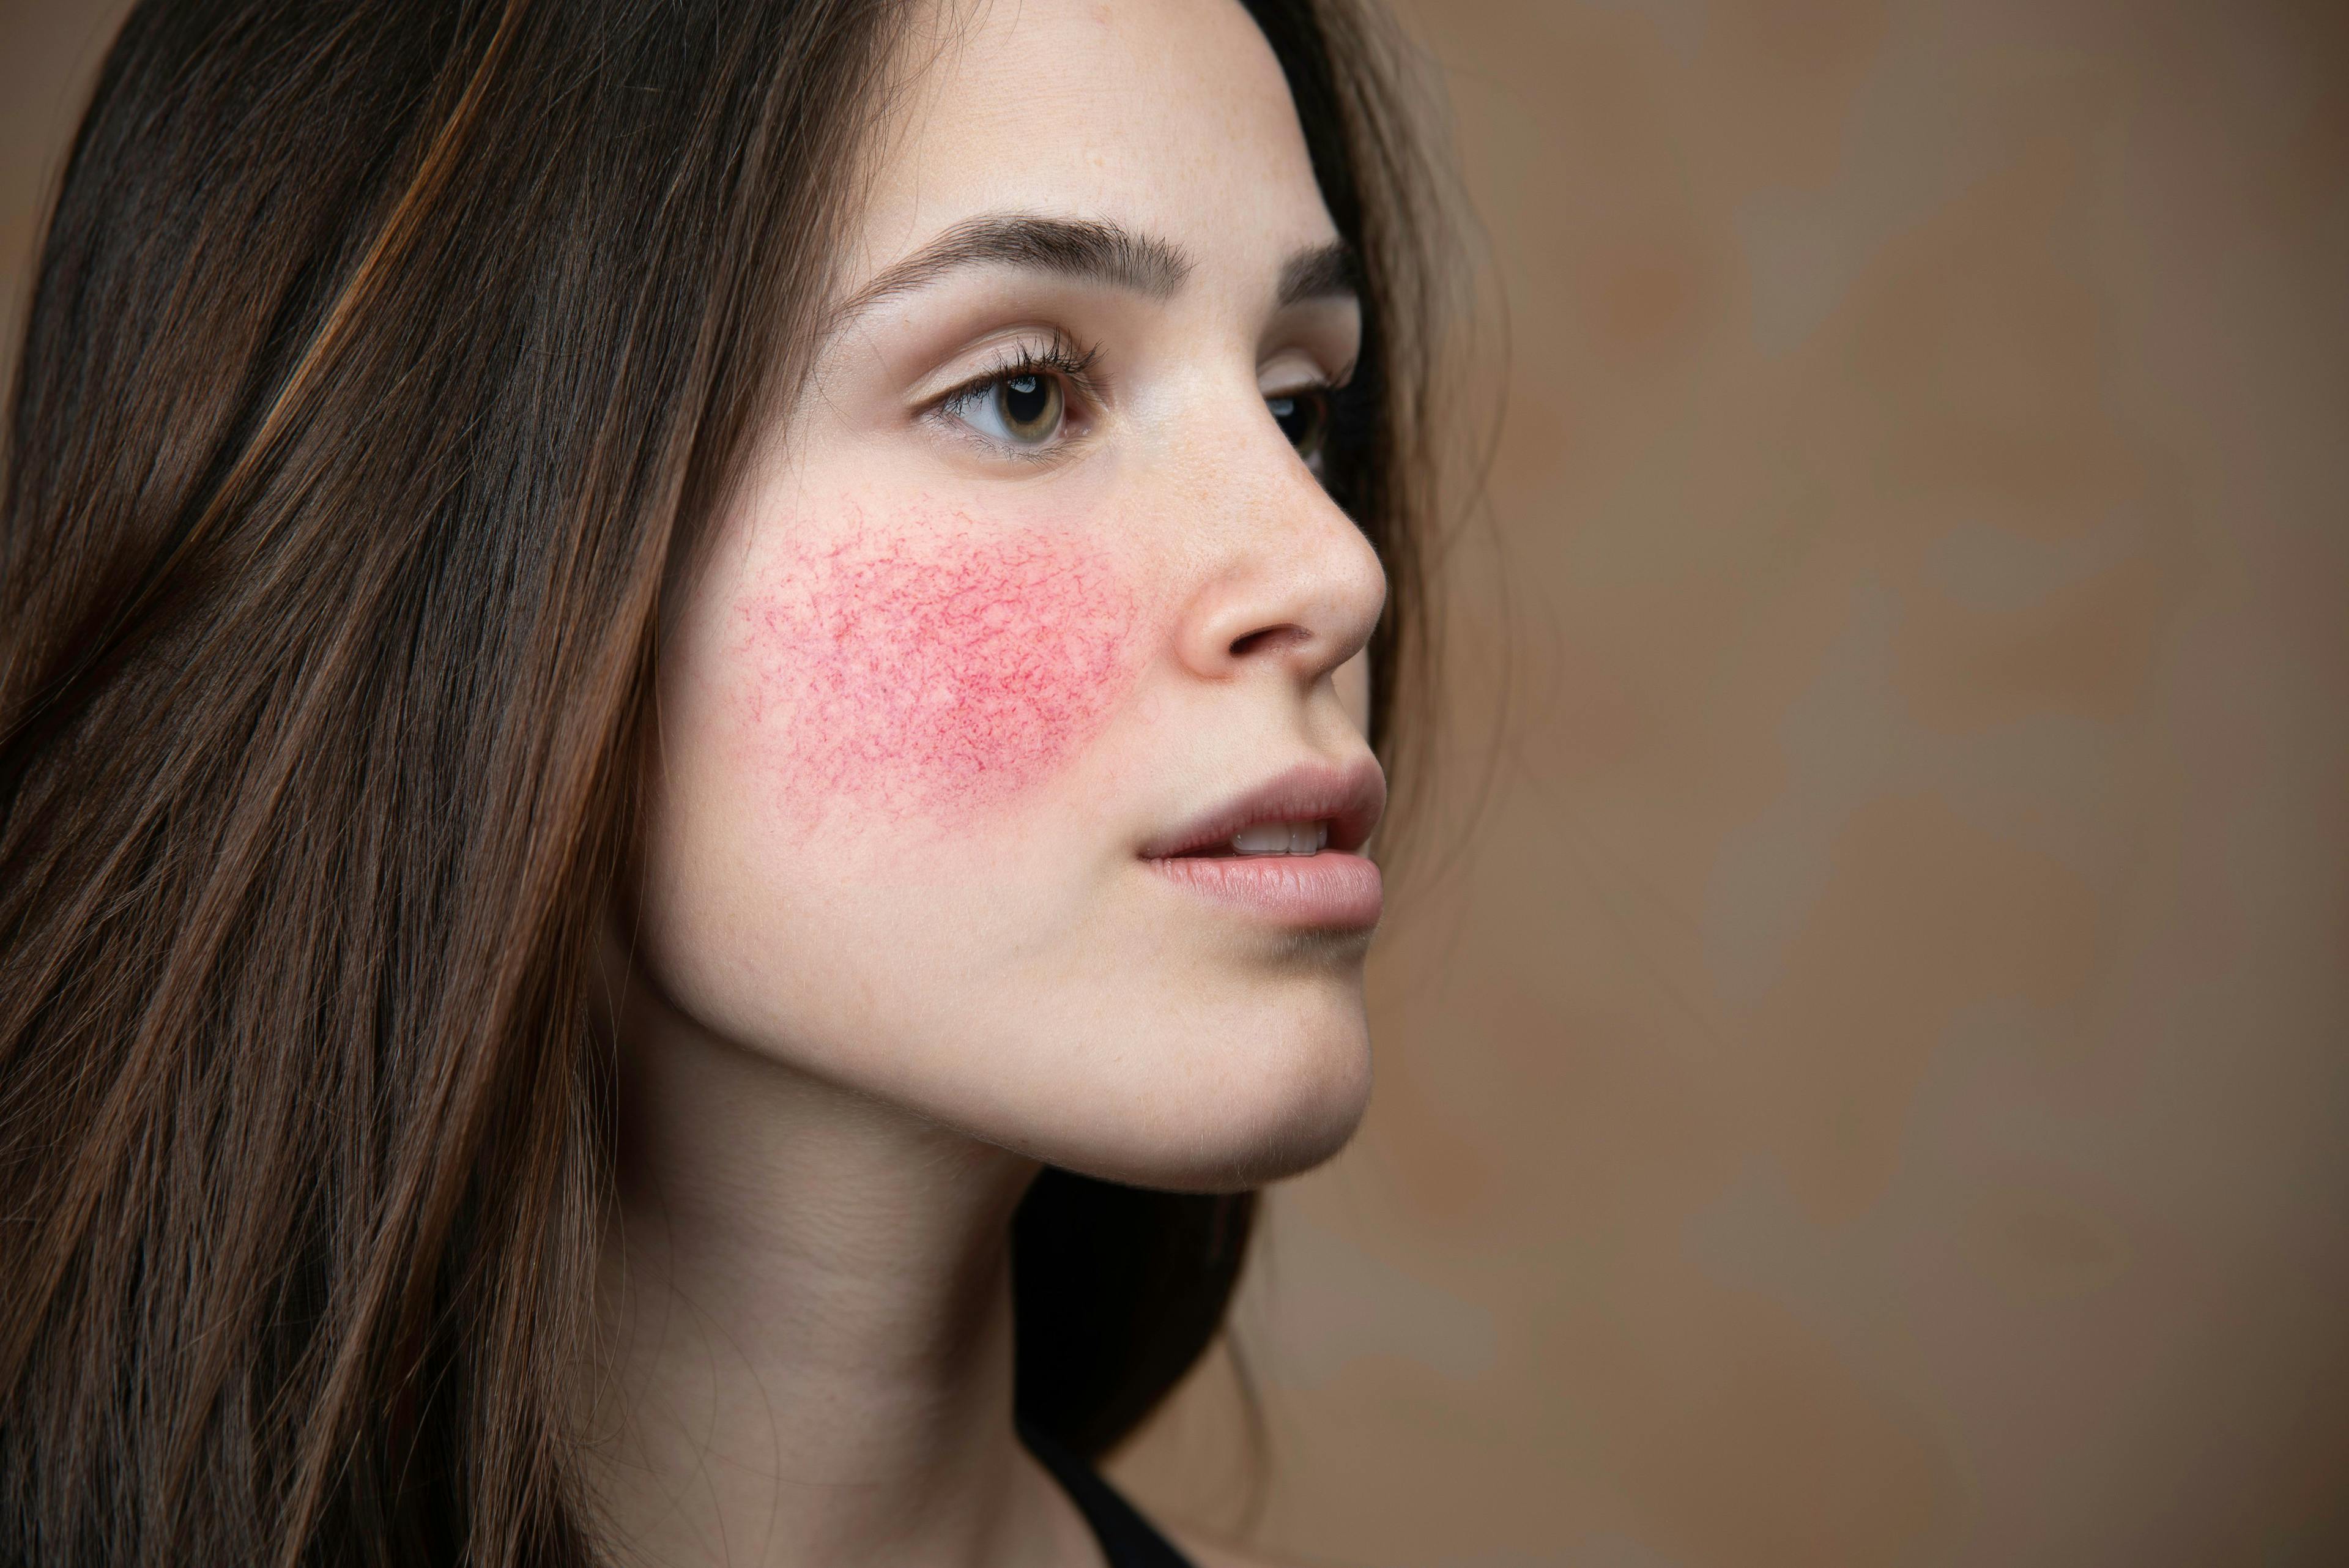 Microencapsulated Benzoyl Peroxide Reduces Rosacea Lesions